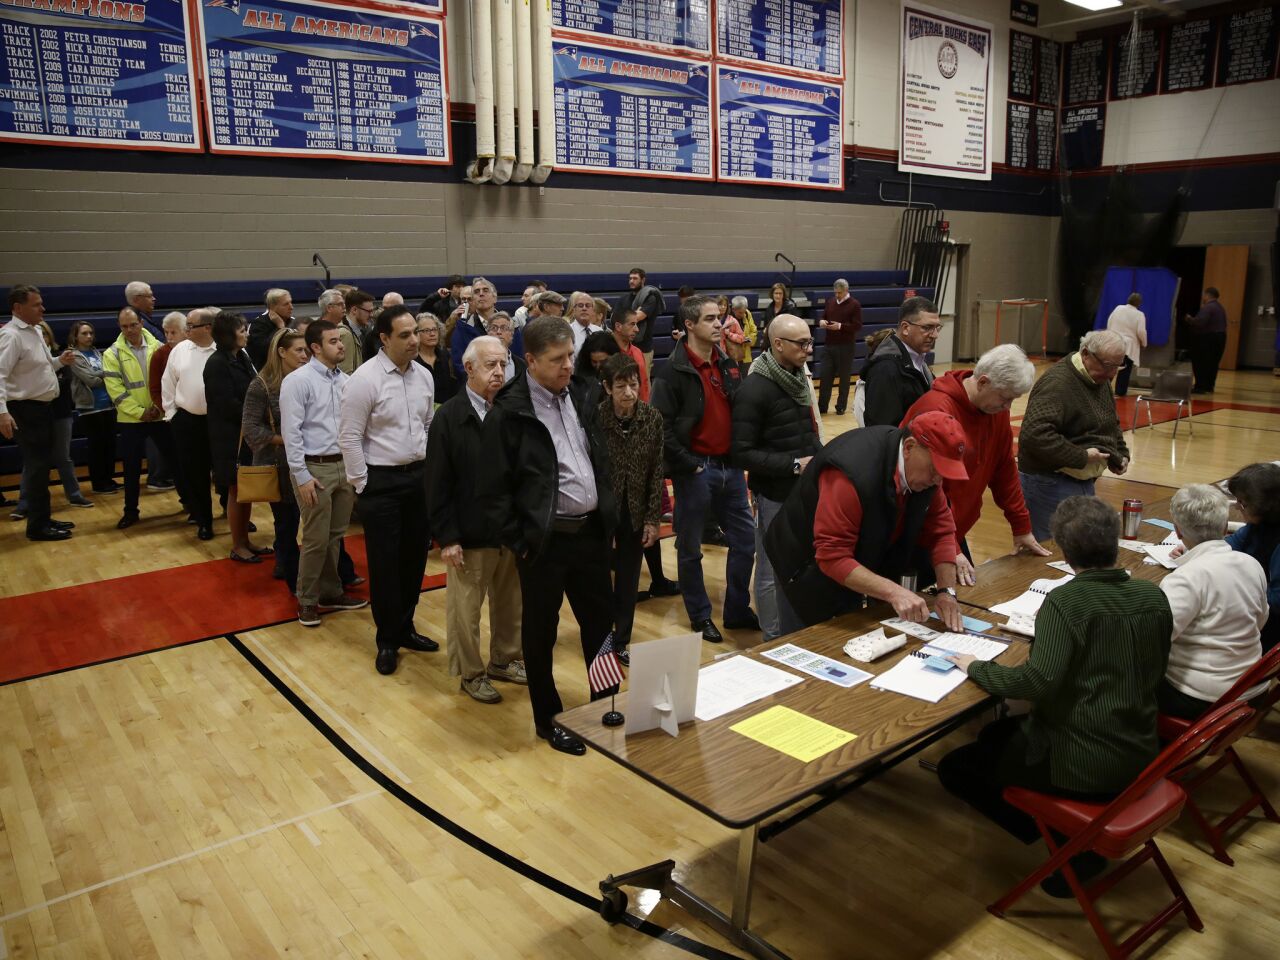 Voters line up to vote at a polling place in Doylestown, Pa.